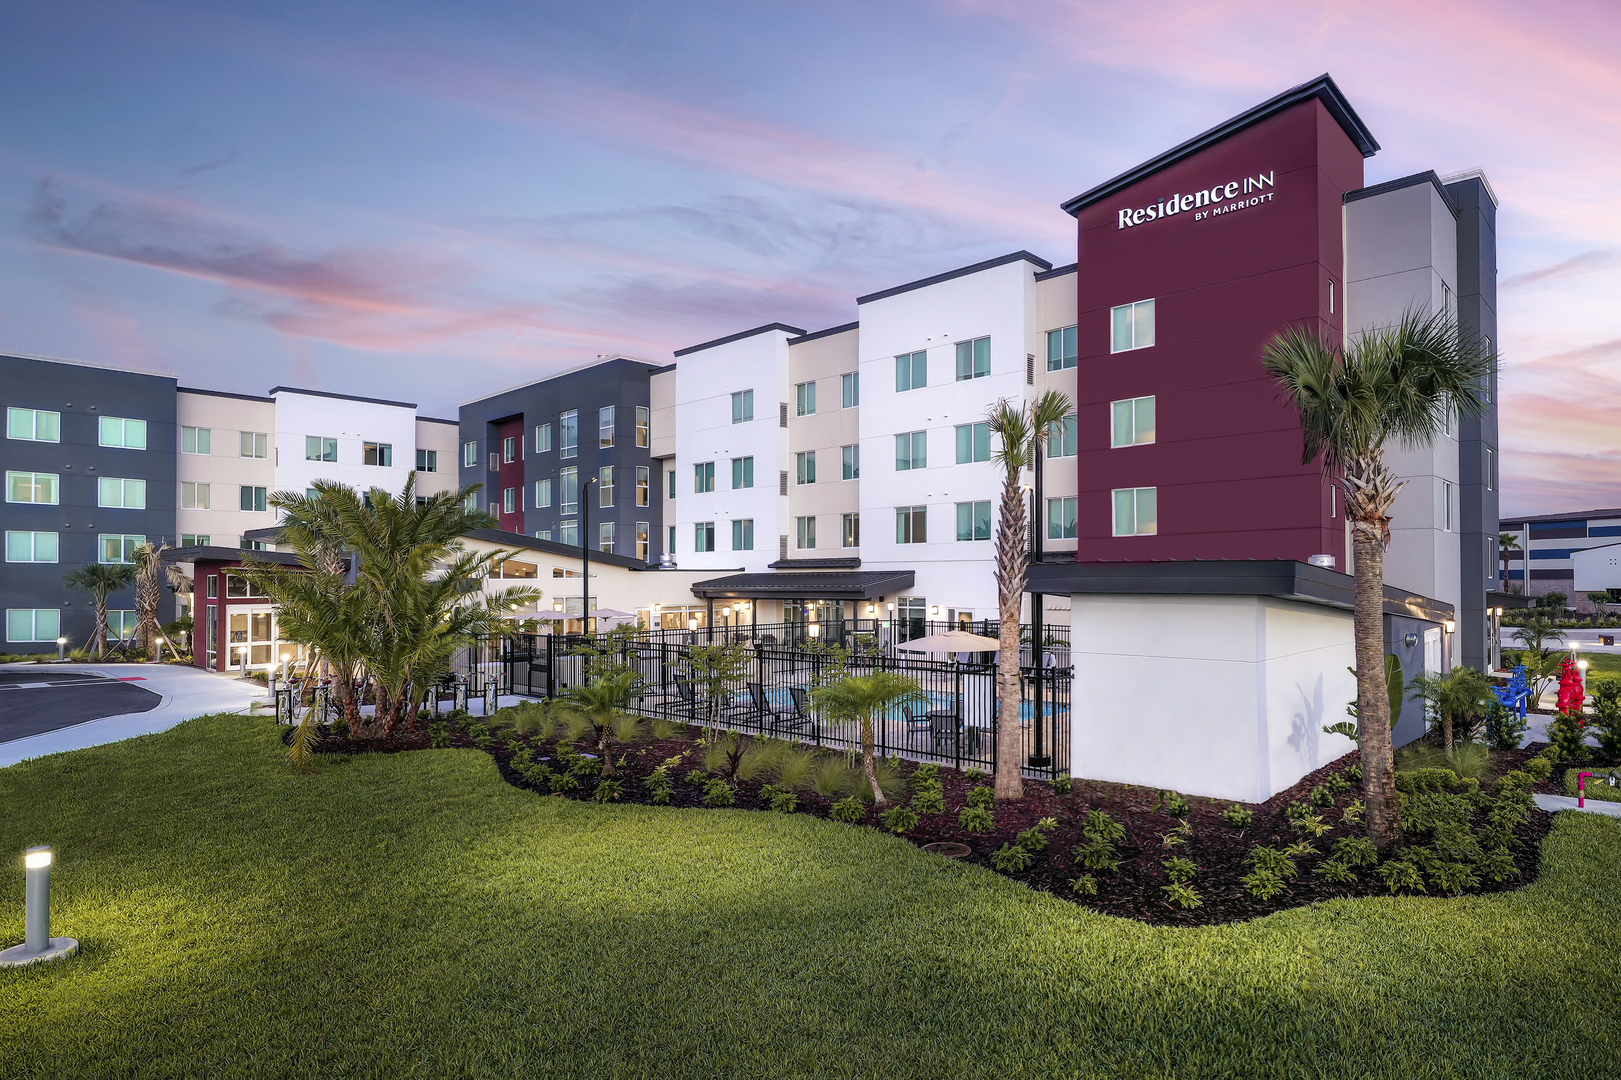 Ext white, purple, gray hotel with green landscape in front